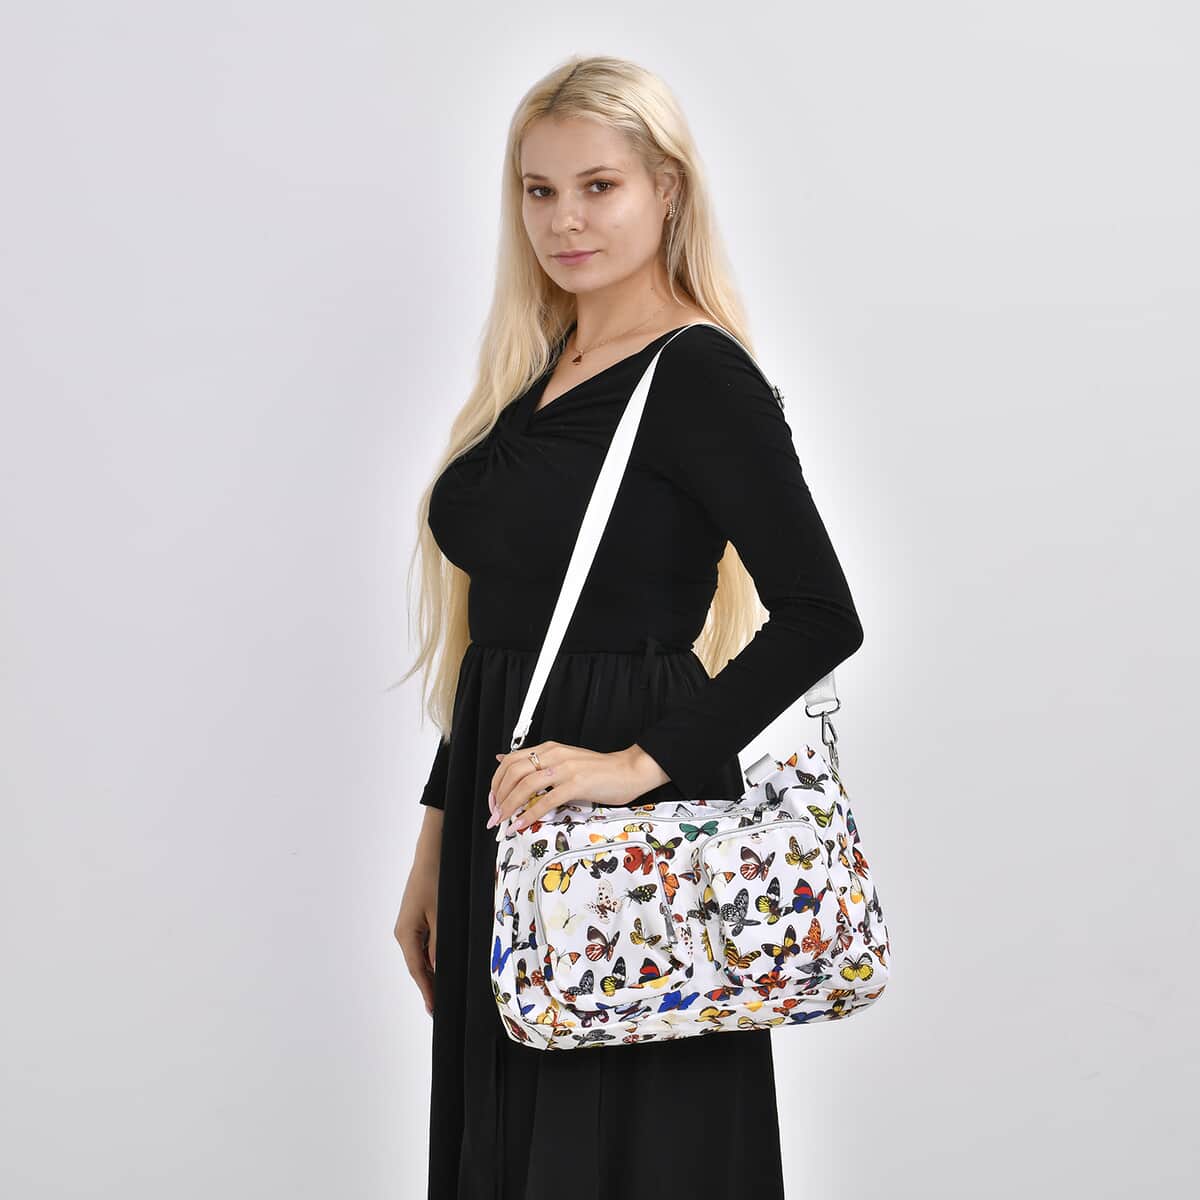 White and Multi Butterfly Pattern CrossBody Bag (14.6"x3.9"x10.6") with Handle Drop and Shoulder Strap (50.8") image number 1